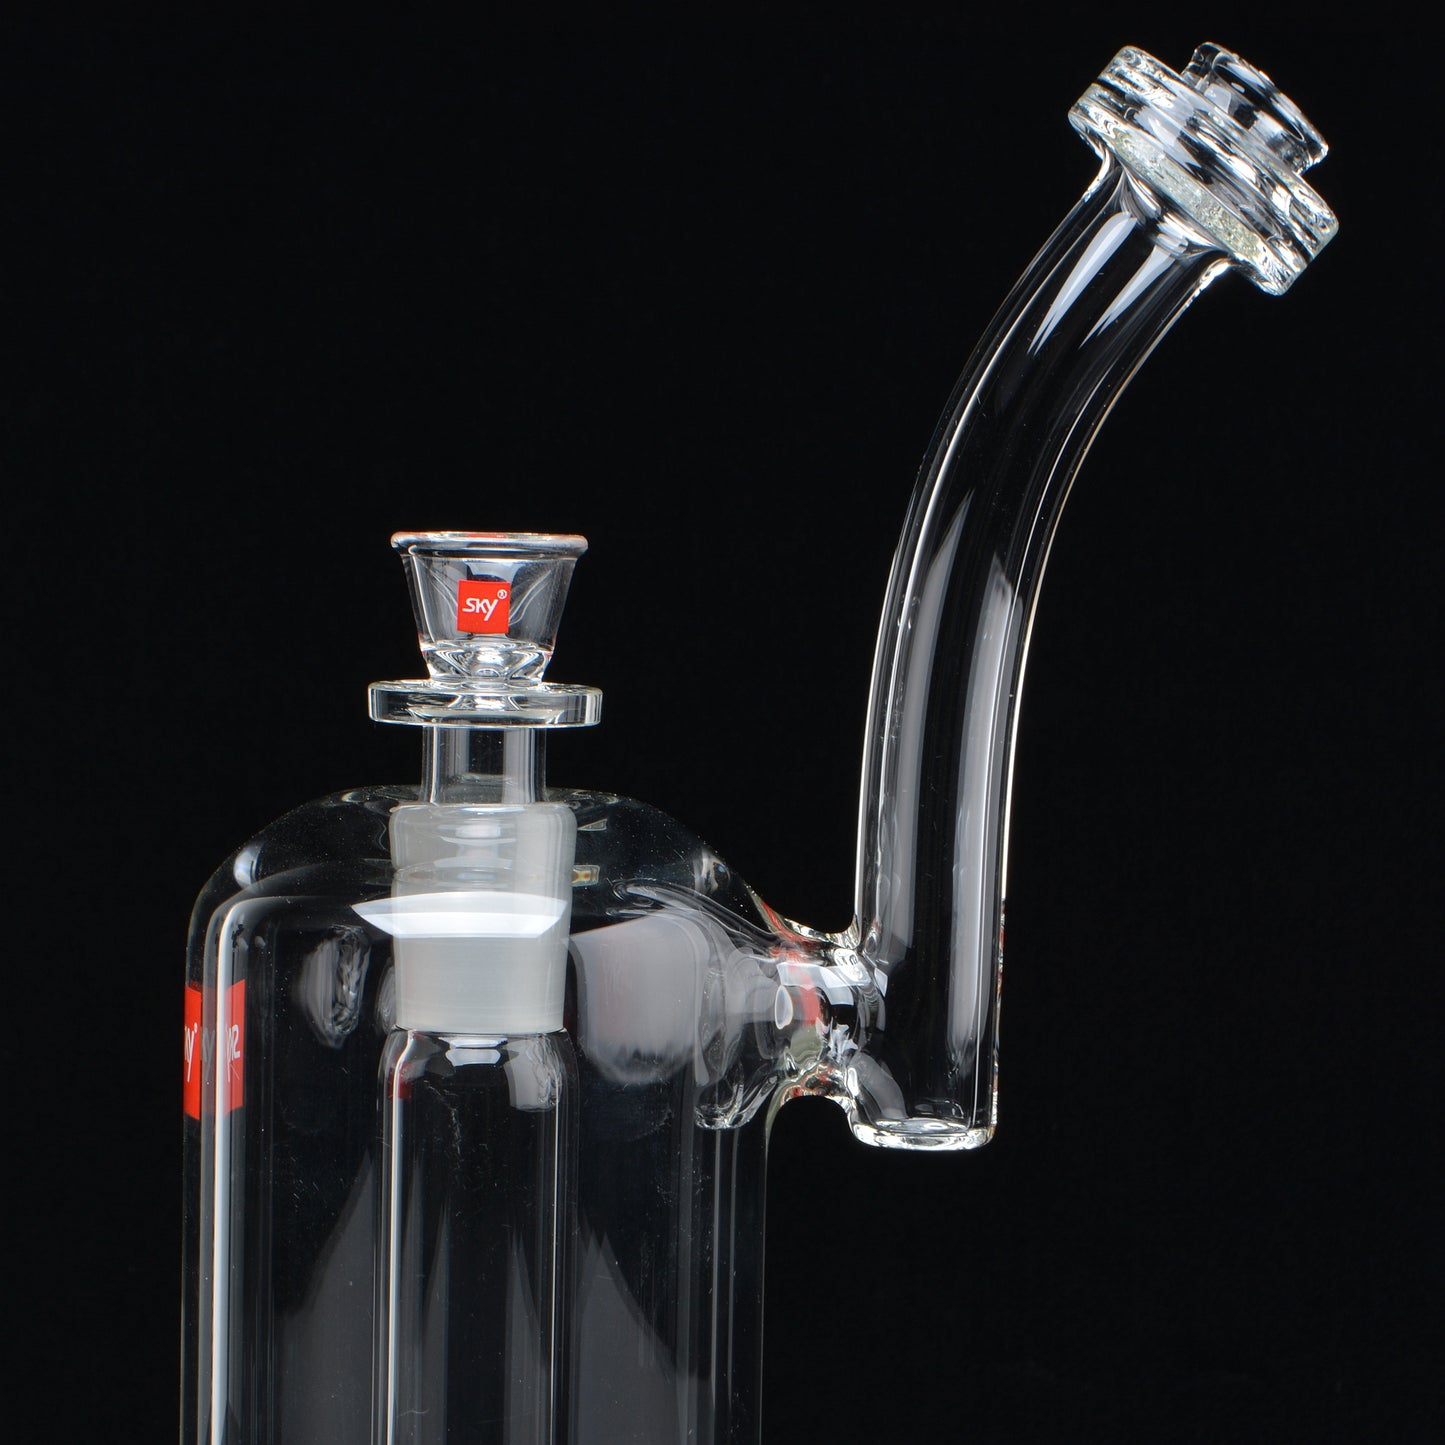 Showerhead Bubbler, with a fixed mouthpiece